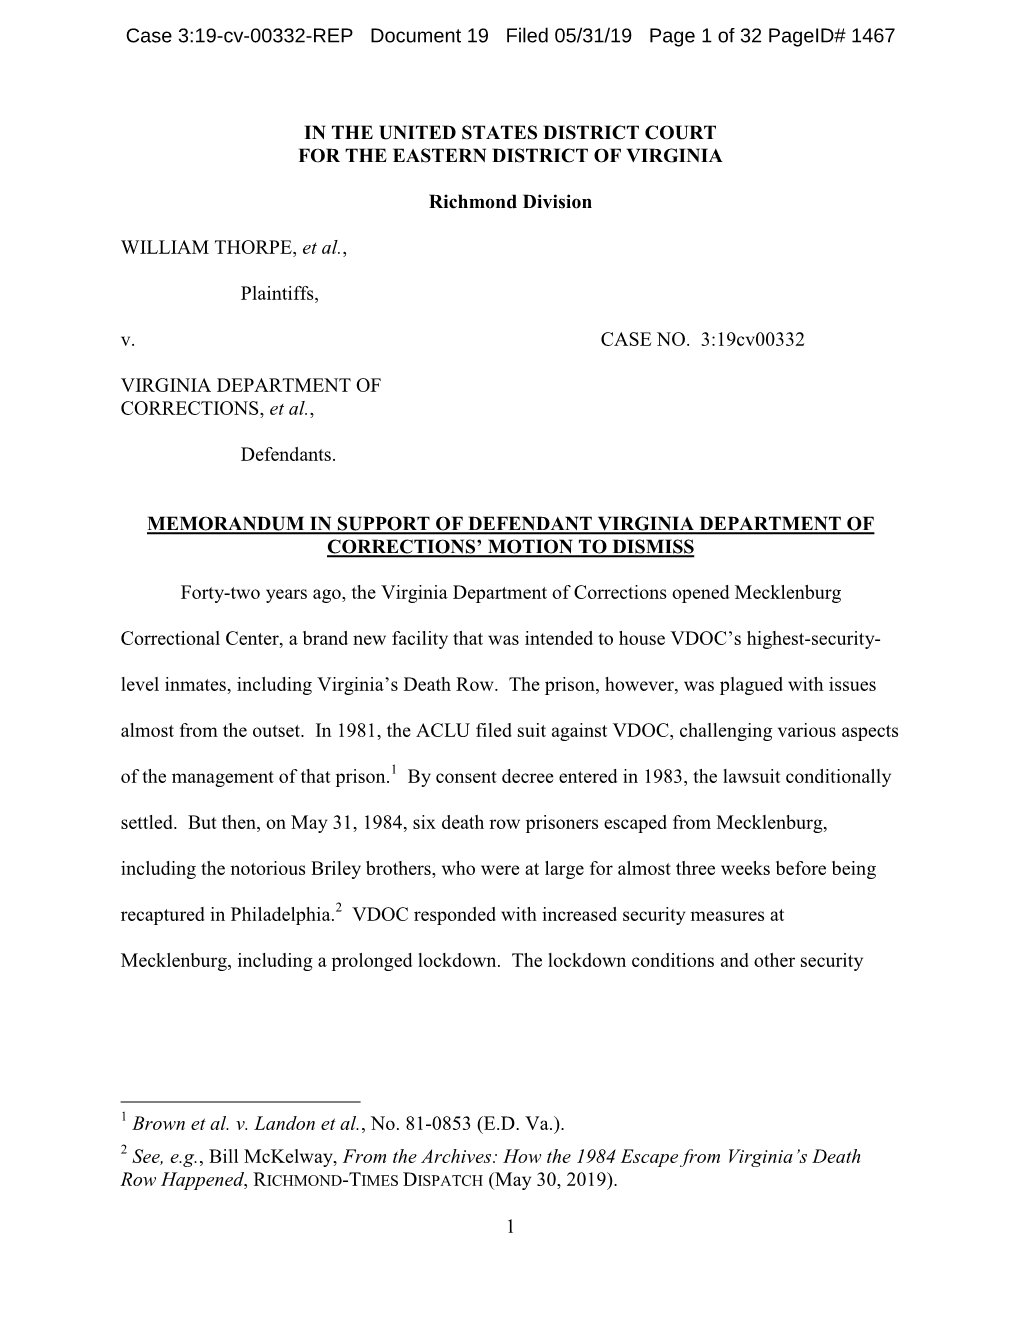 Pdfdefendants' Memo in Support of VDOC's Motion to Dismiss.Pdf